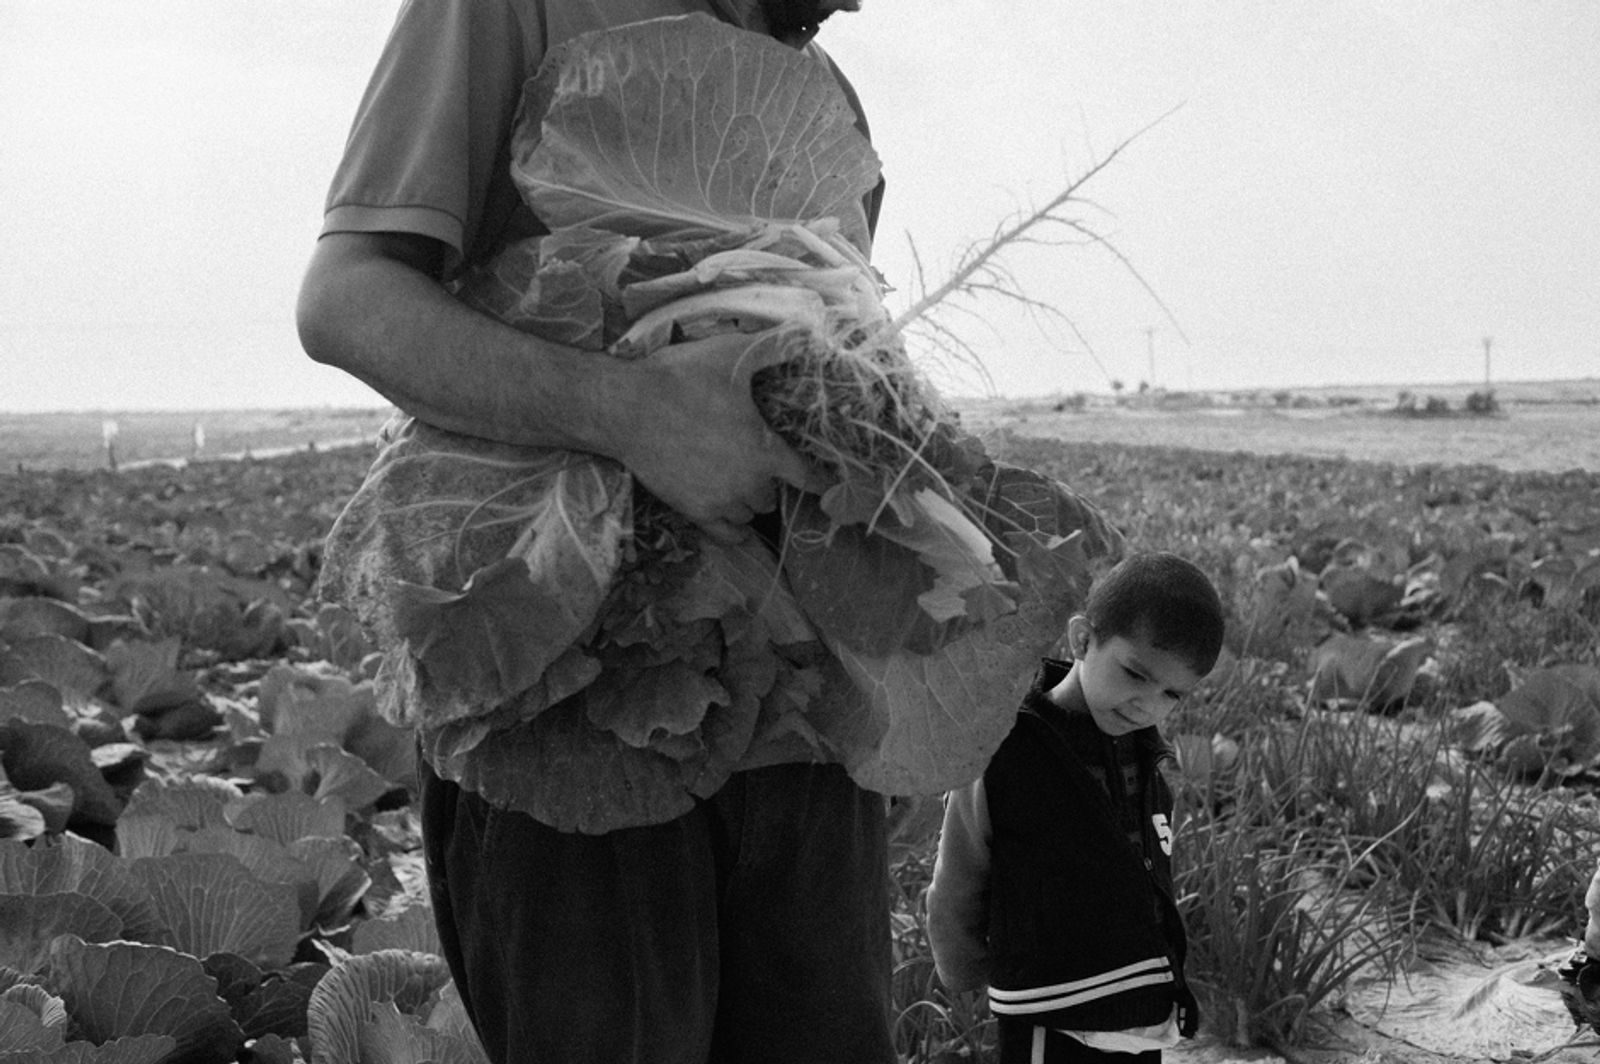 © Jost Franko - Image from the Farming in Gaza photography project